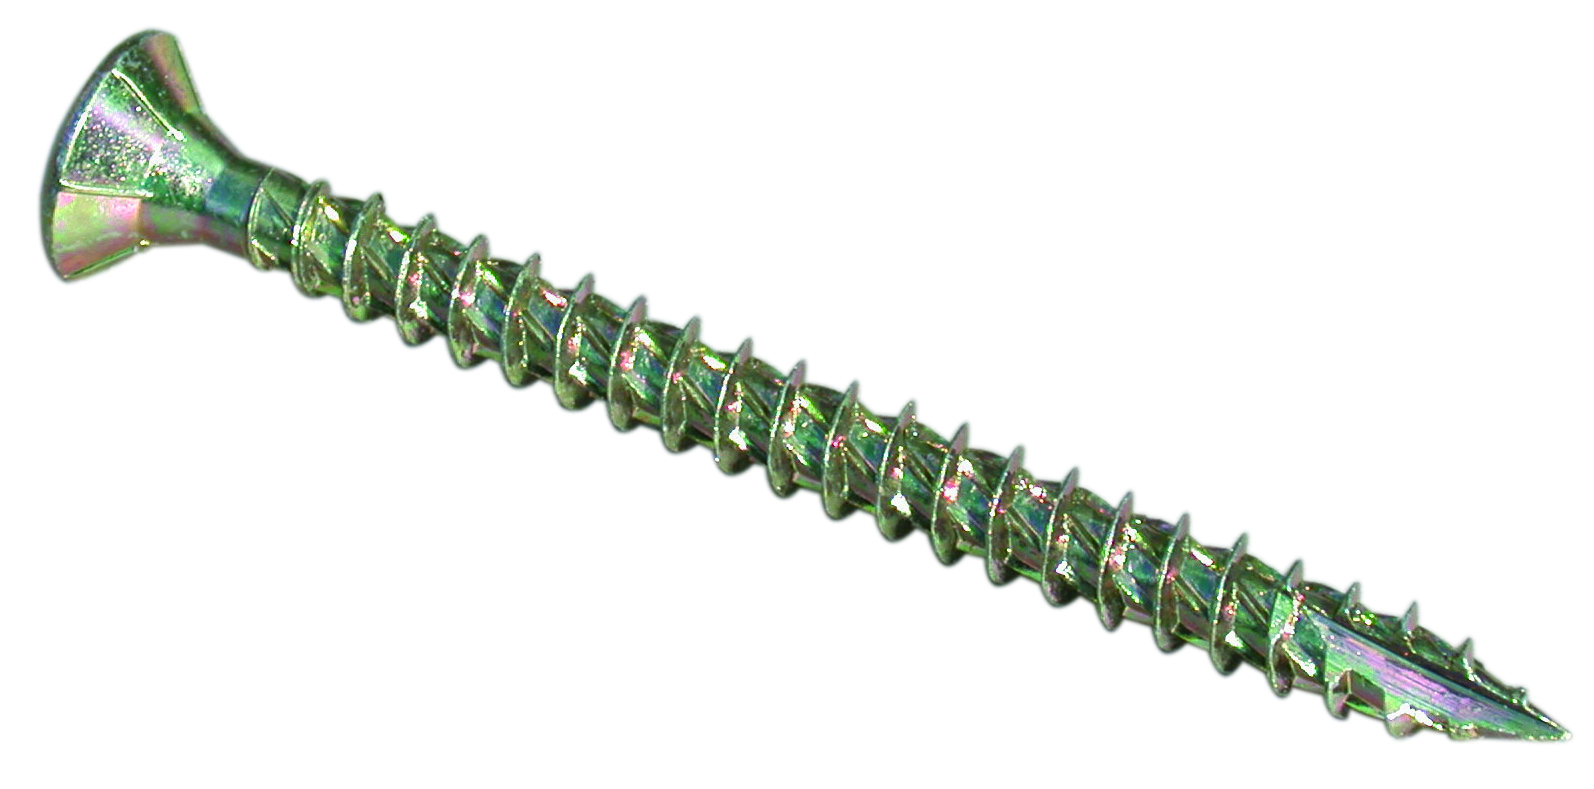 Double Csk Head Pozi Chipboard Flooring Screws For Squeaky